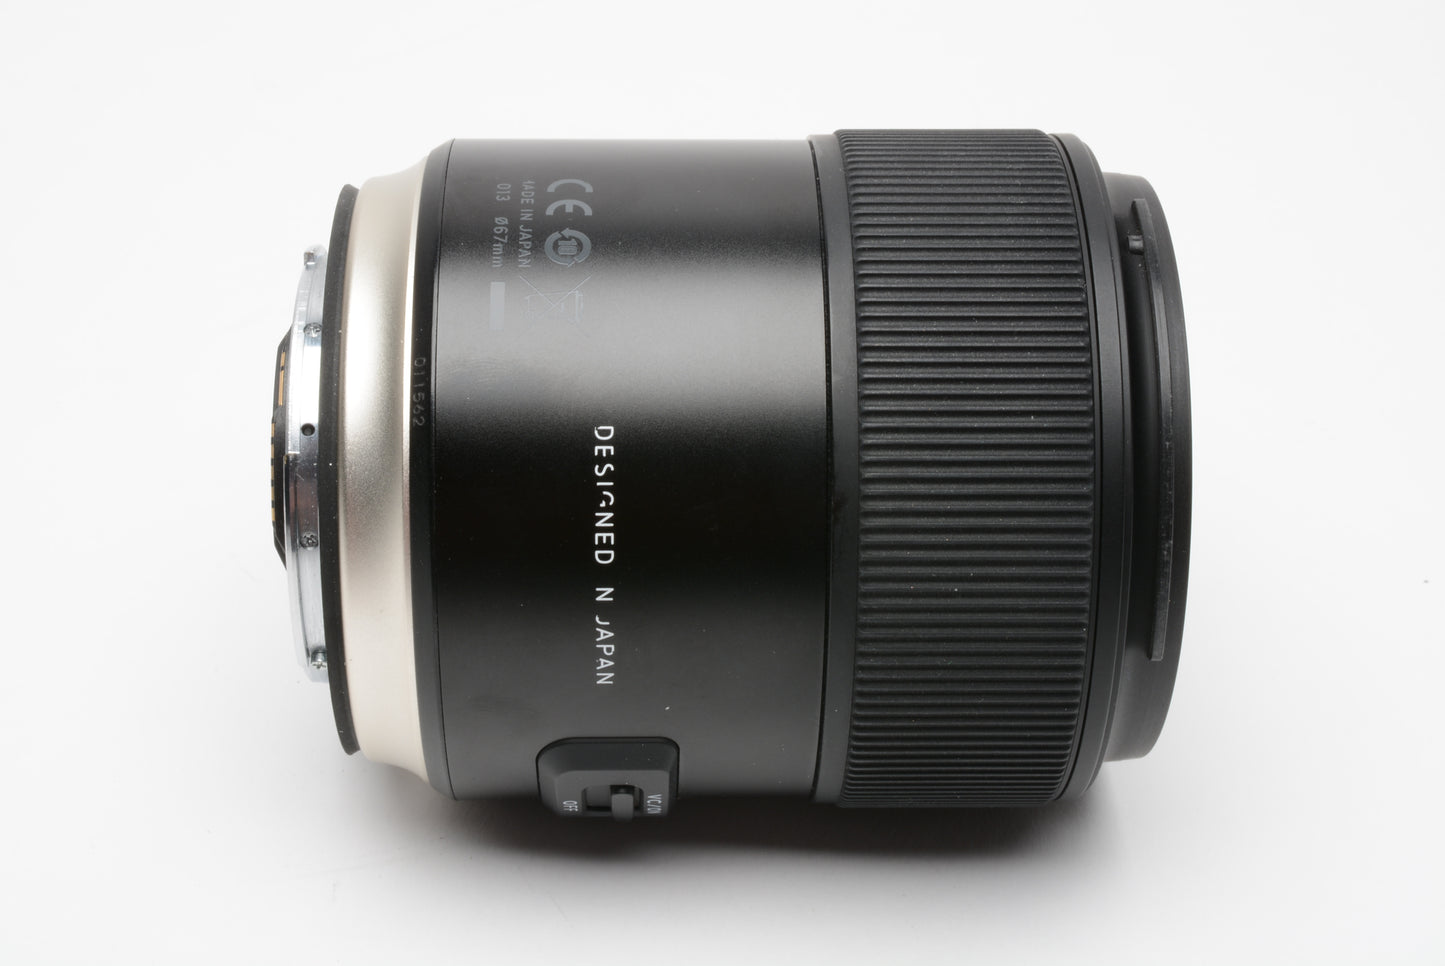 Tamron SP 45mm f1.8 Di VC USD lens for Canon EF, boxed, USA Version